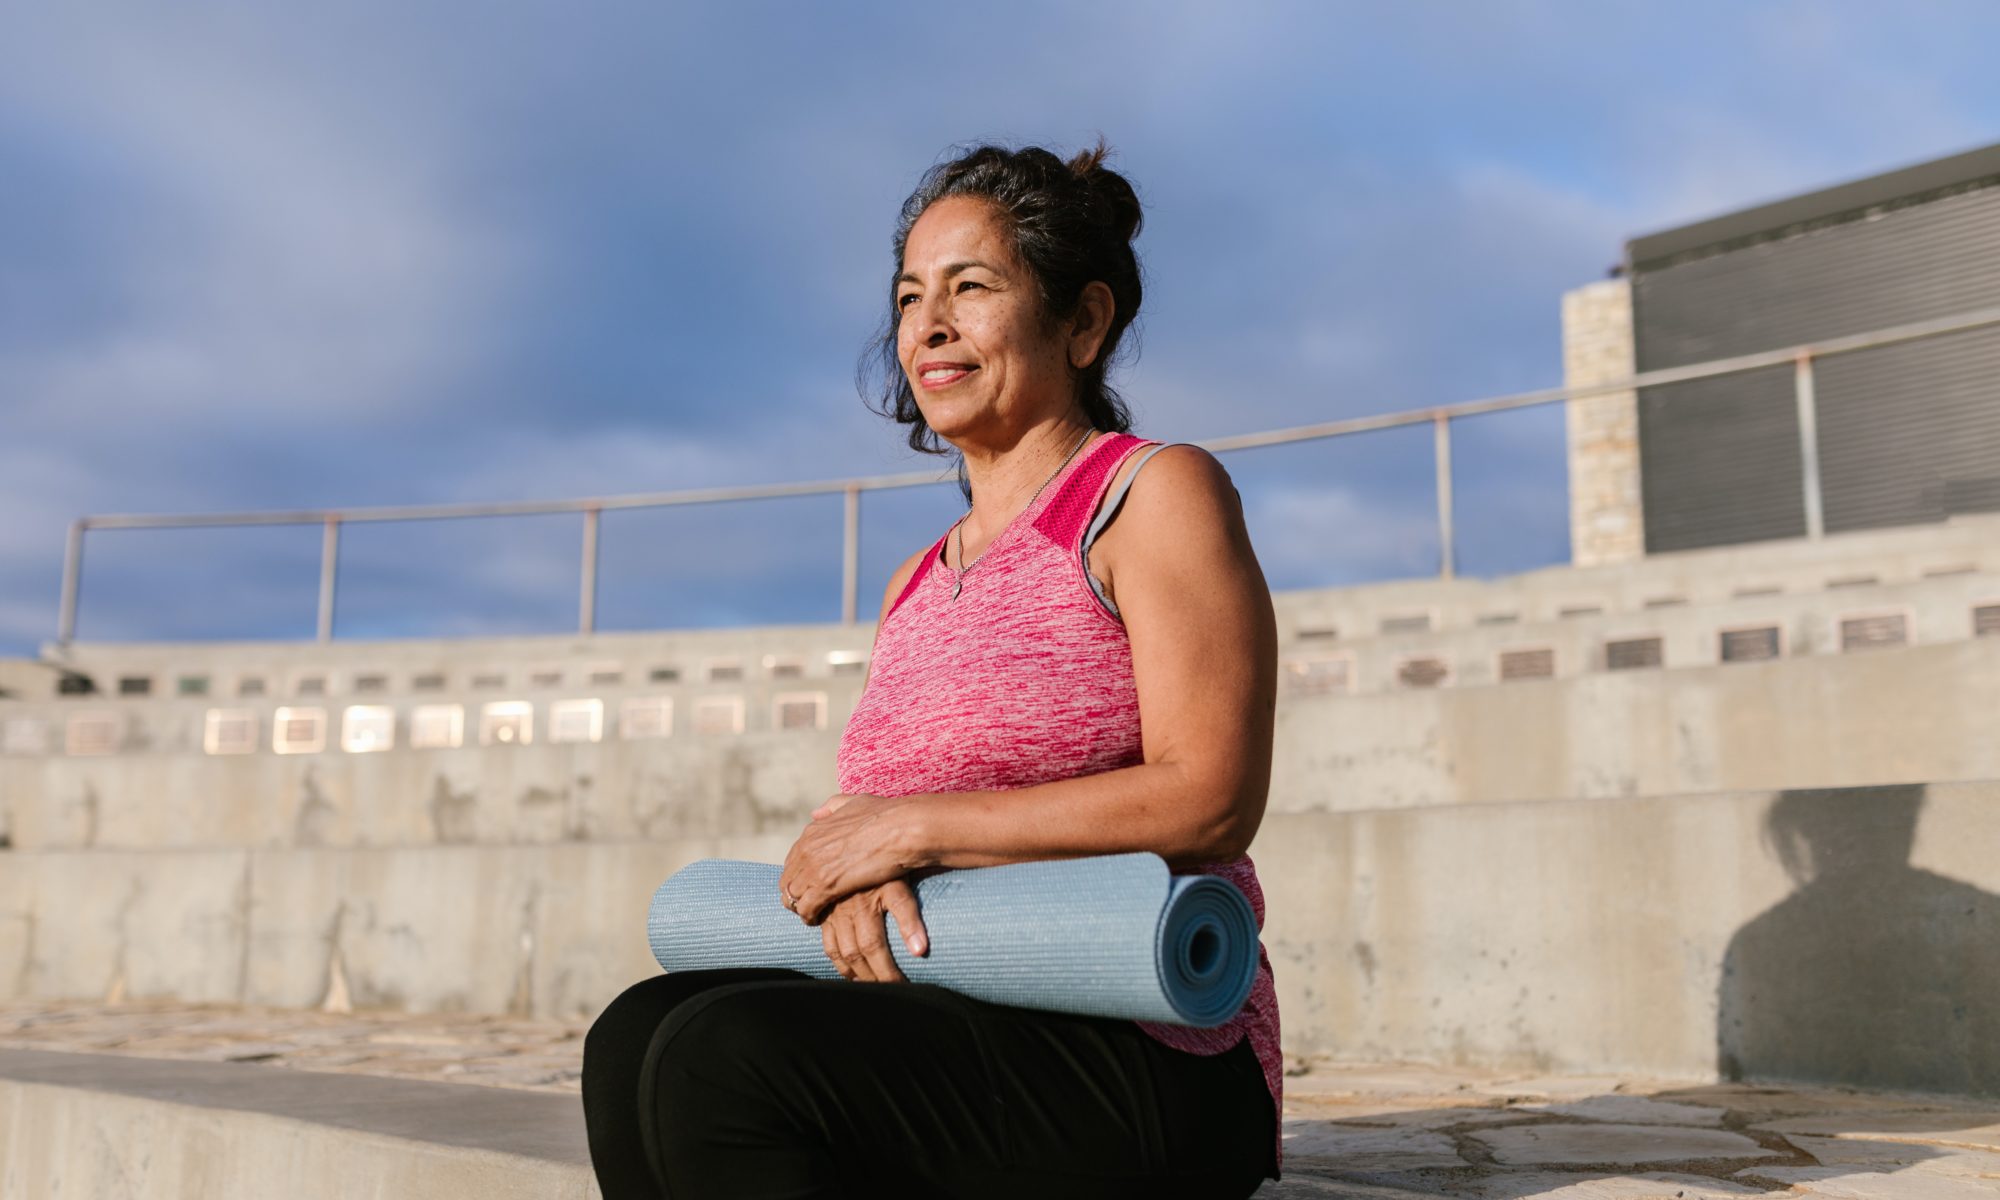 Smiling woman sitting and holding a yoga mat.